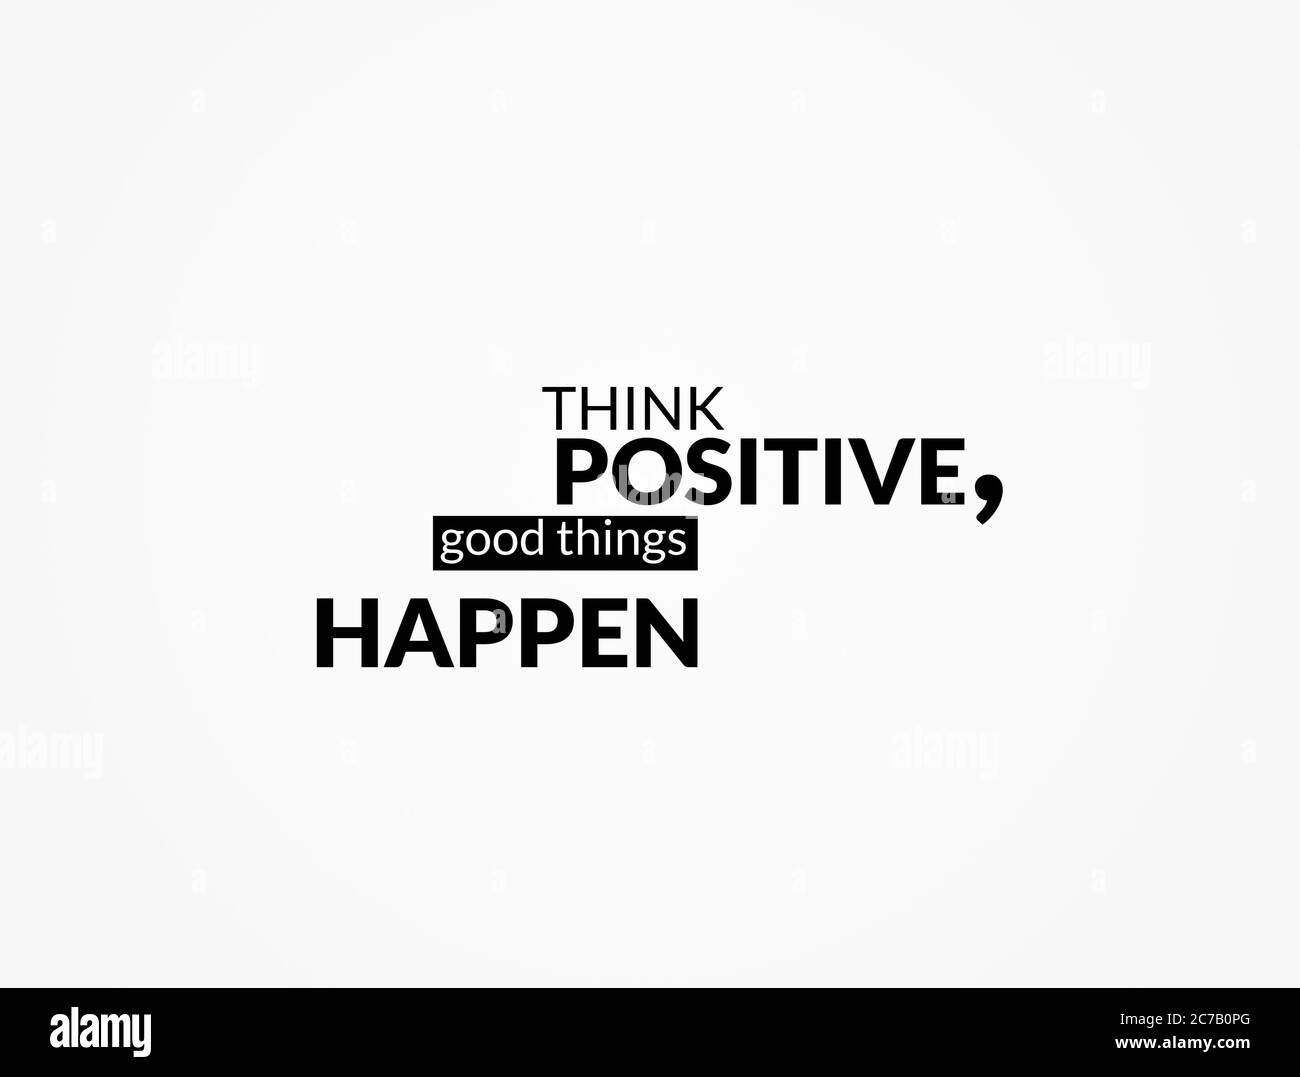 think positive good things happen quotes illustration Stock Photo